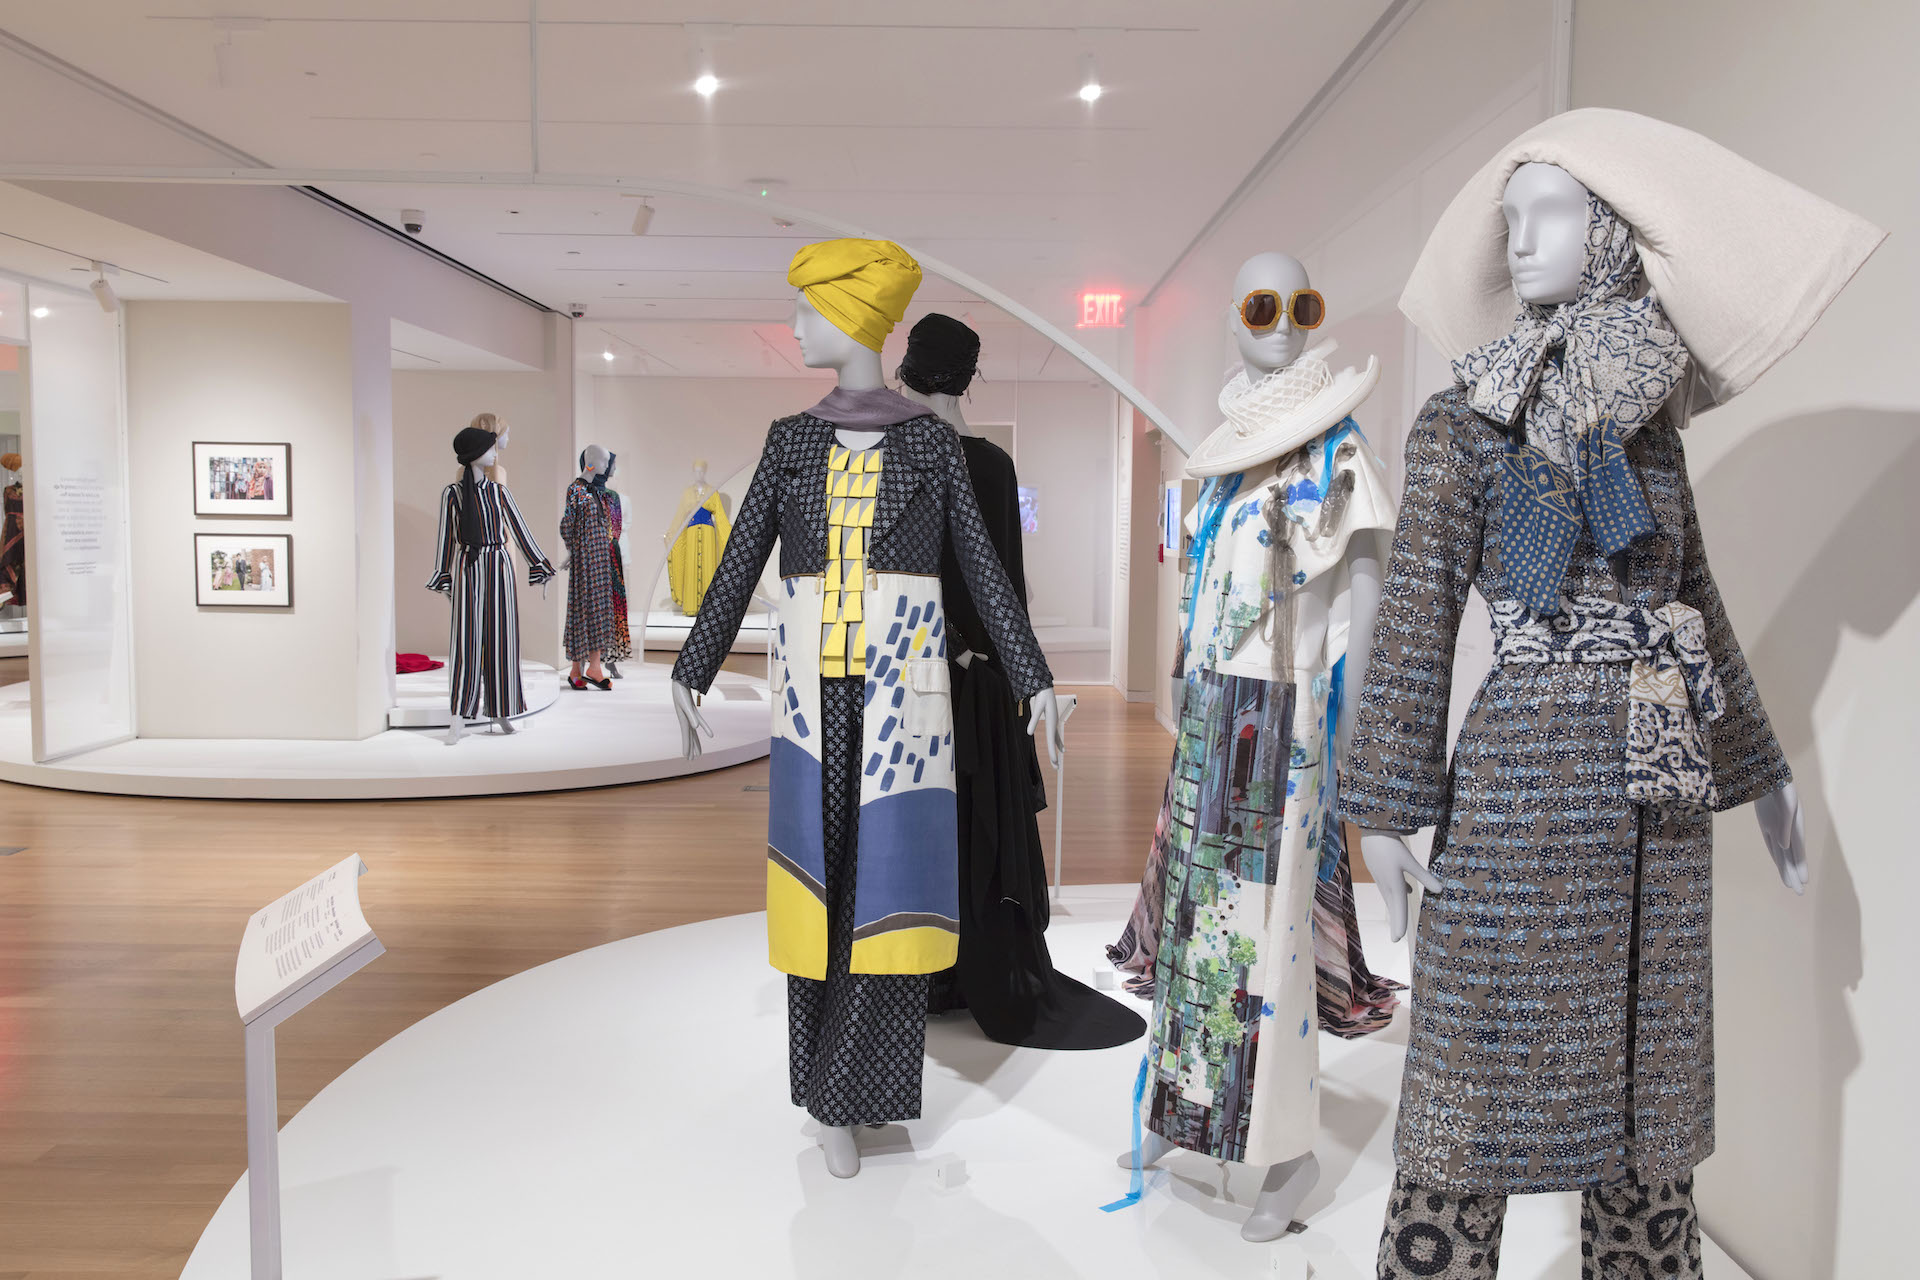 Mannequins wearing colorful printed clothing inside a Cooper Hewitt gallery space